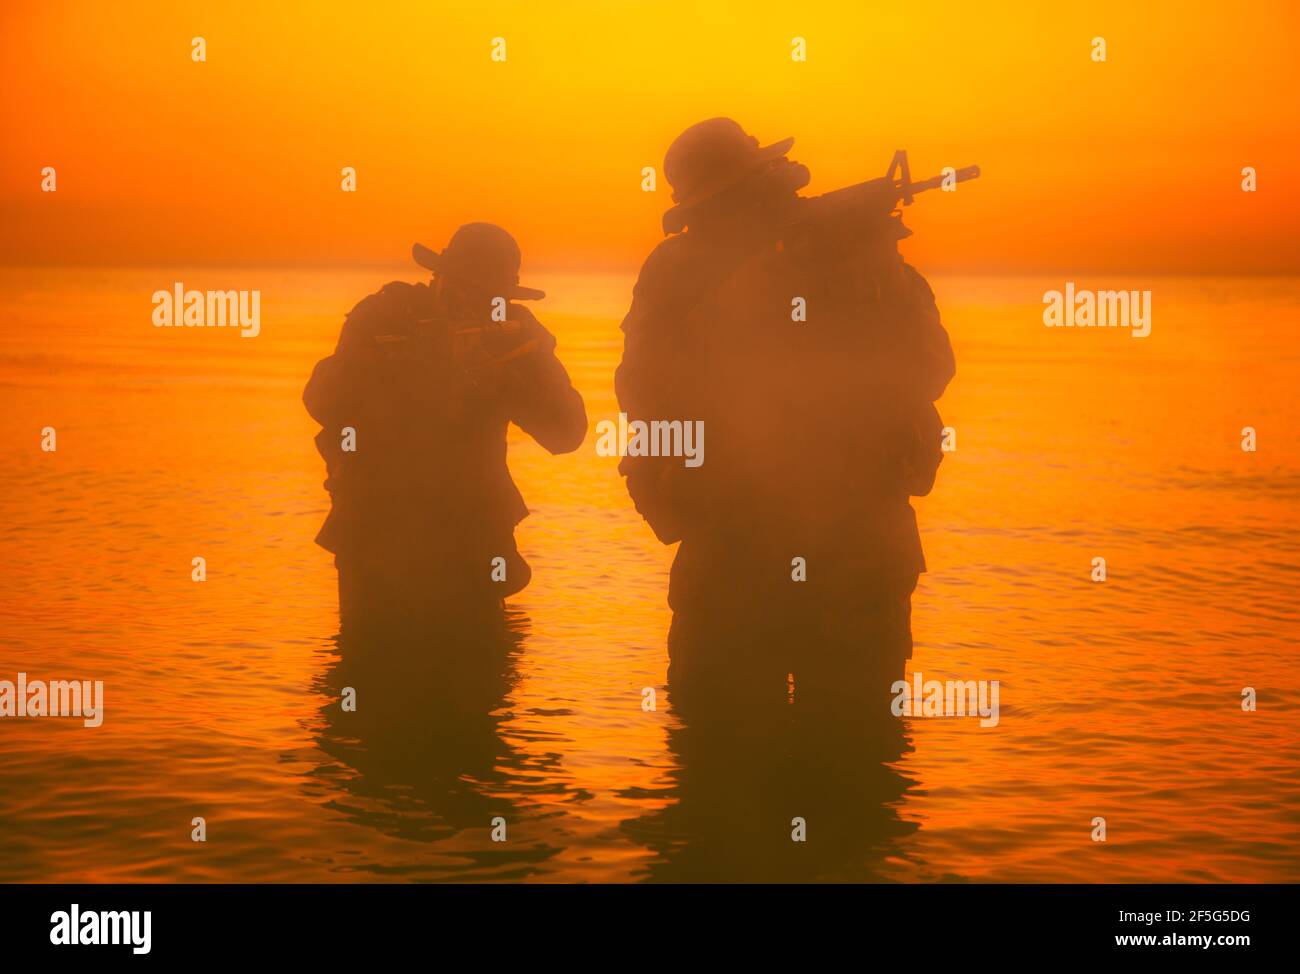 Commando soldiers walking in water, army special operations forces fighters sneaking in darkness, aiming assault rifles and observing shore during amphibious operation on coast at night or dawn Stock Photo